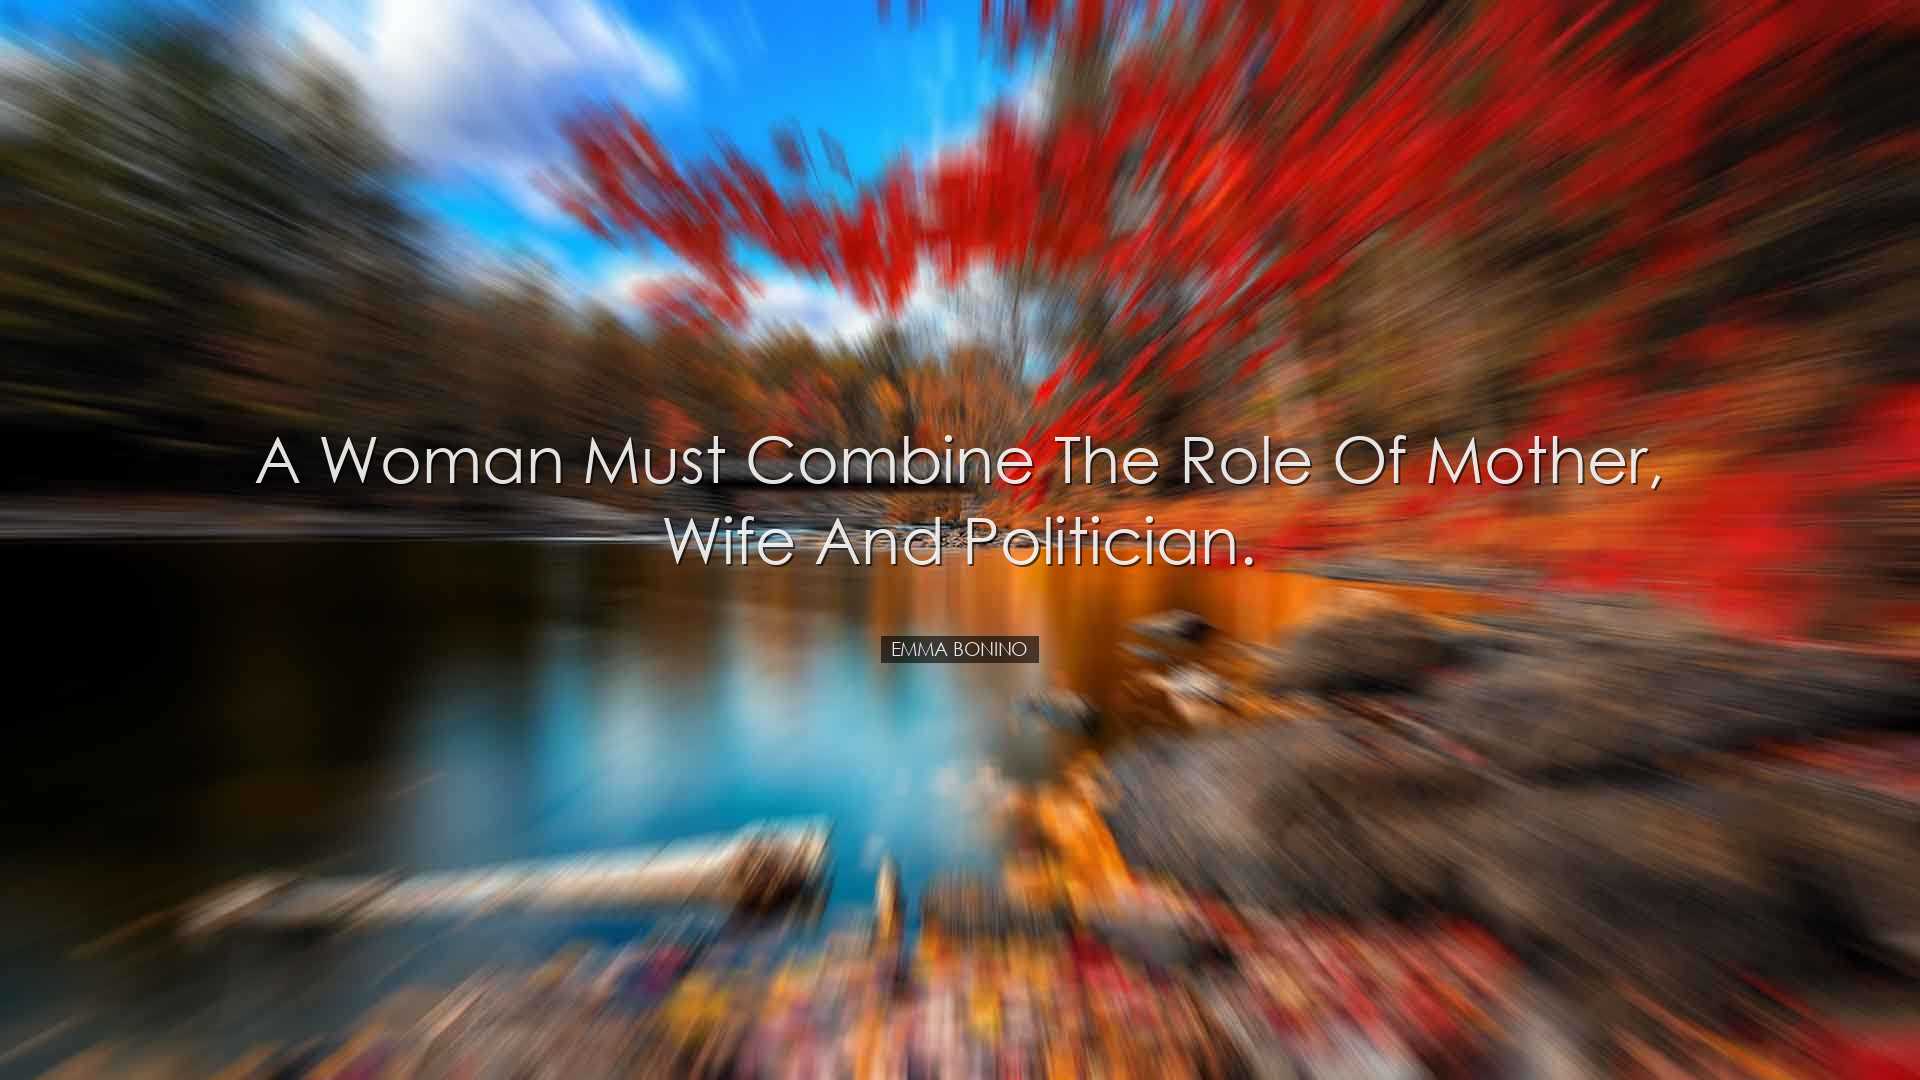 A woman must combine the role of mother, wife and politician. - Em